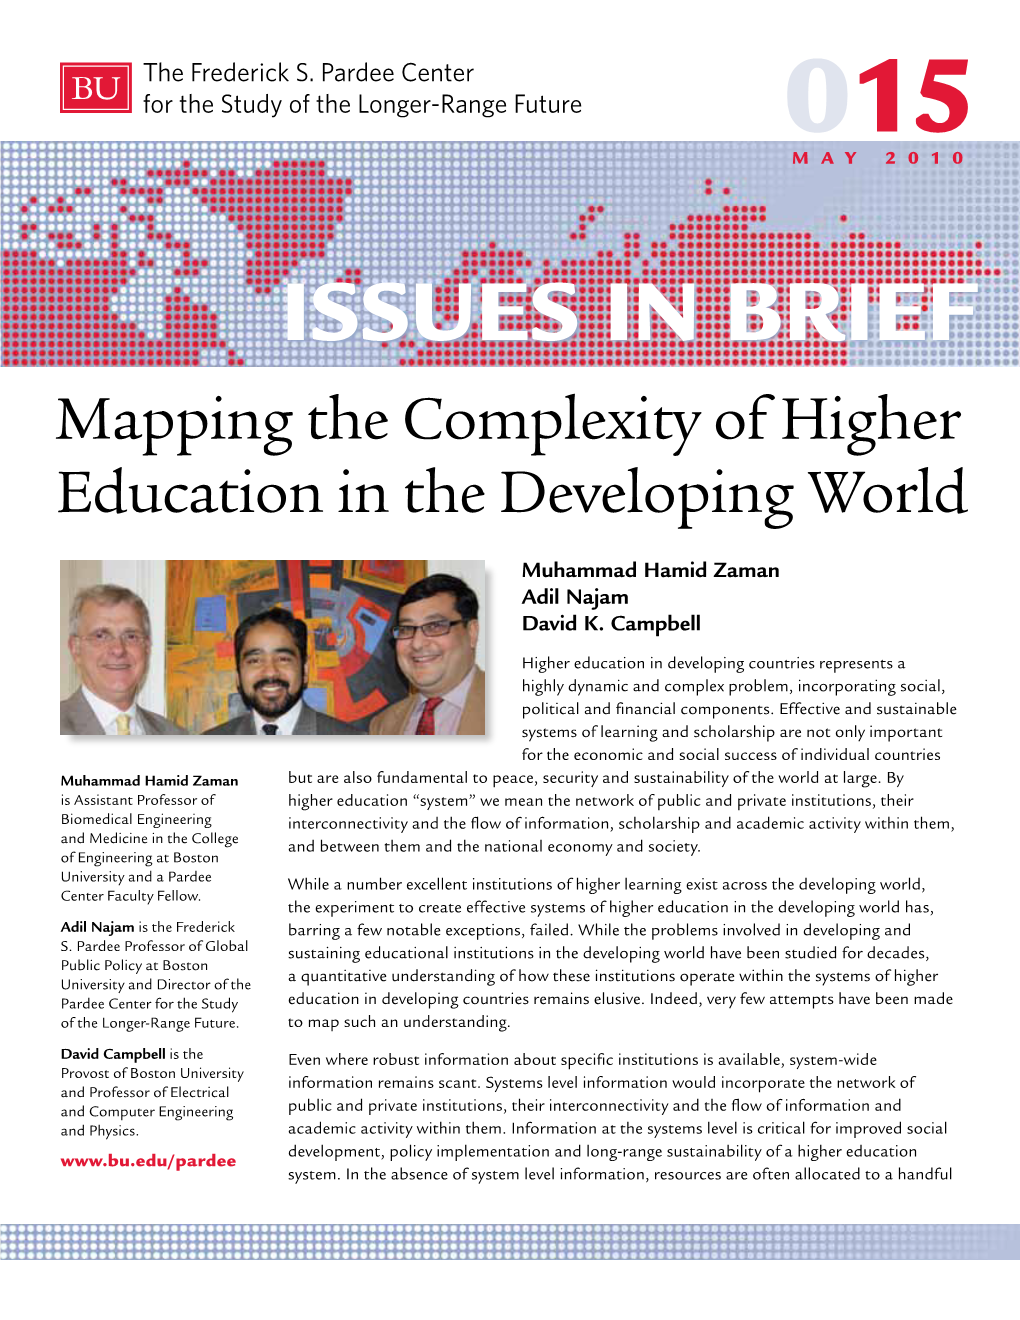 Issues in Brief Mapping the Complexity of Higher Education in the Developing World